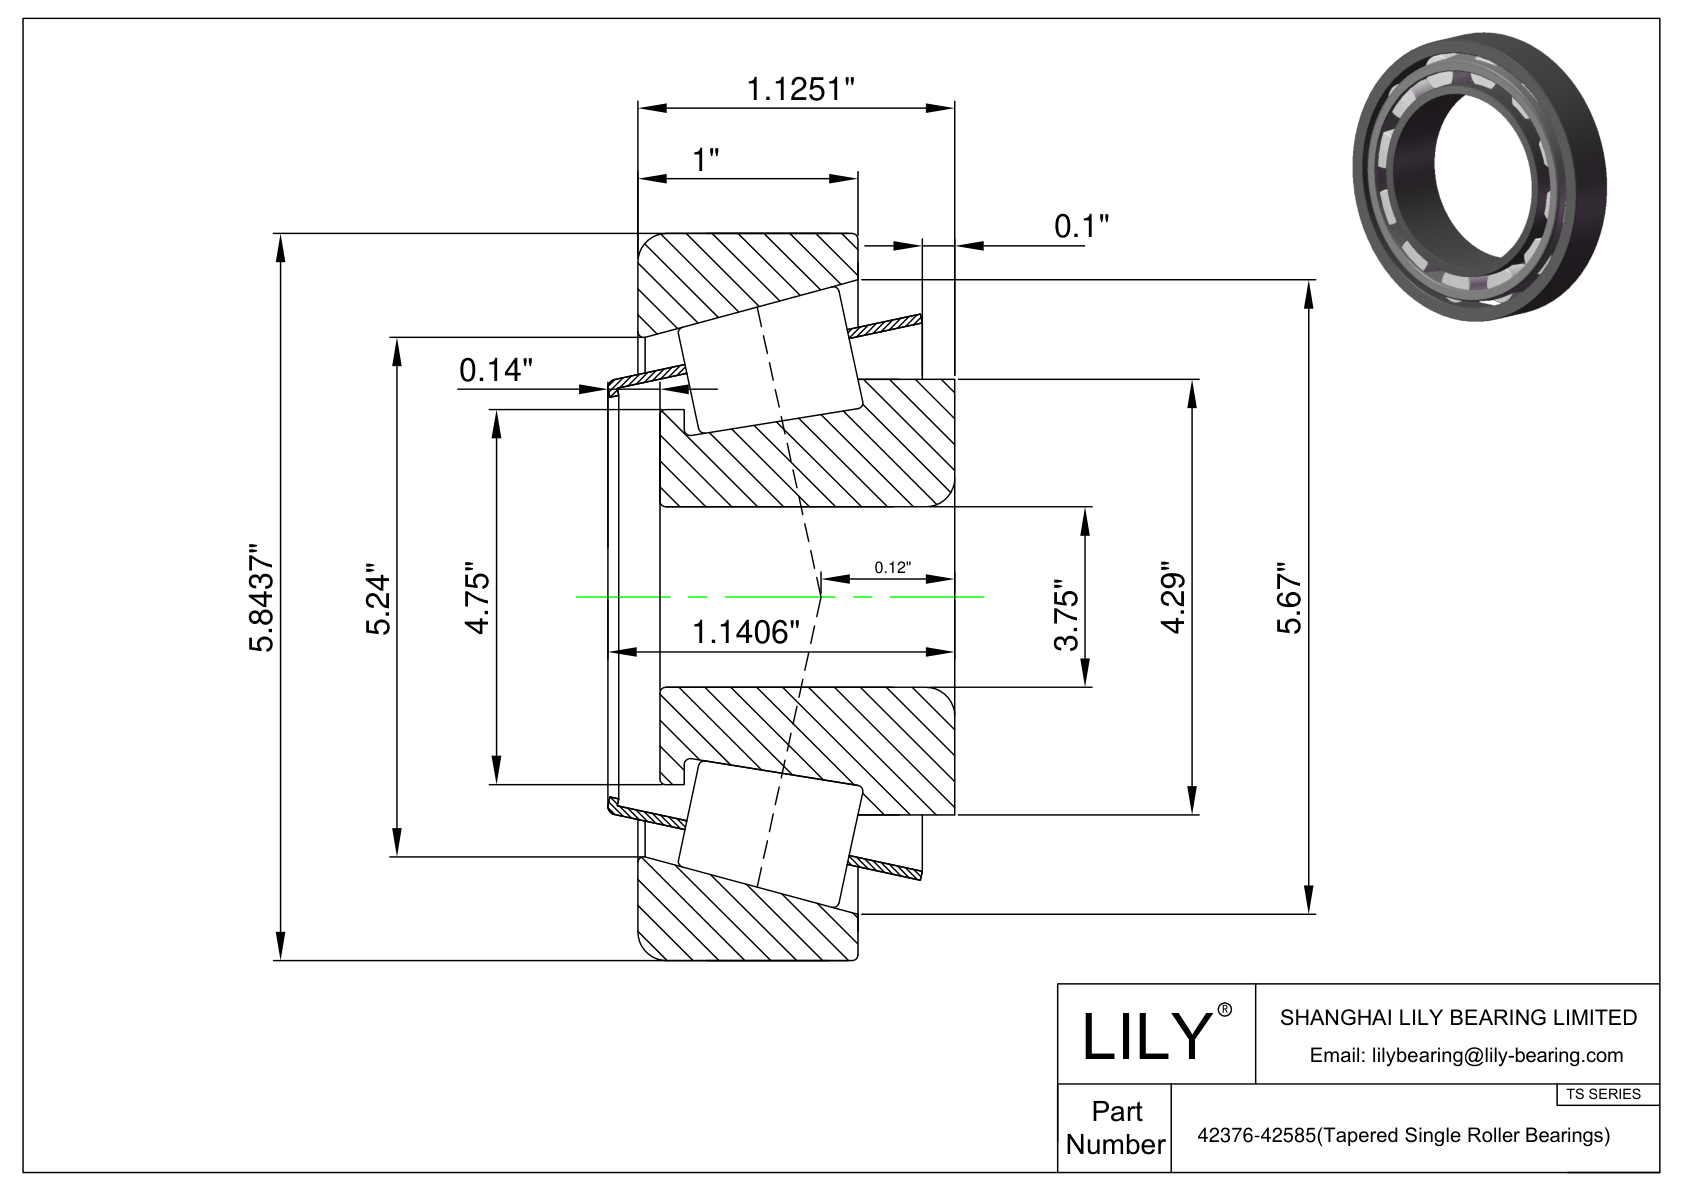 42376-42585 TS (Tapered Single Roller Bearings) (Imperial) cad drawing